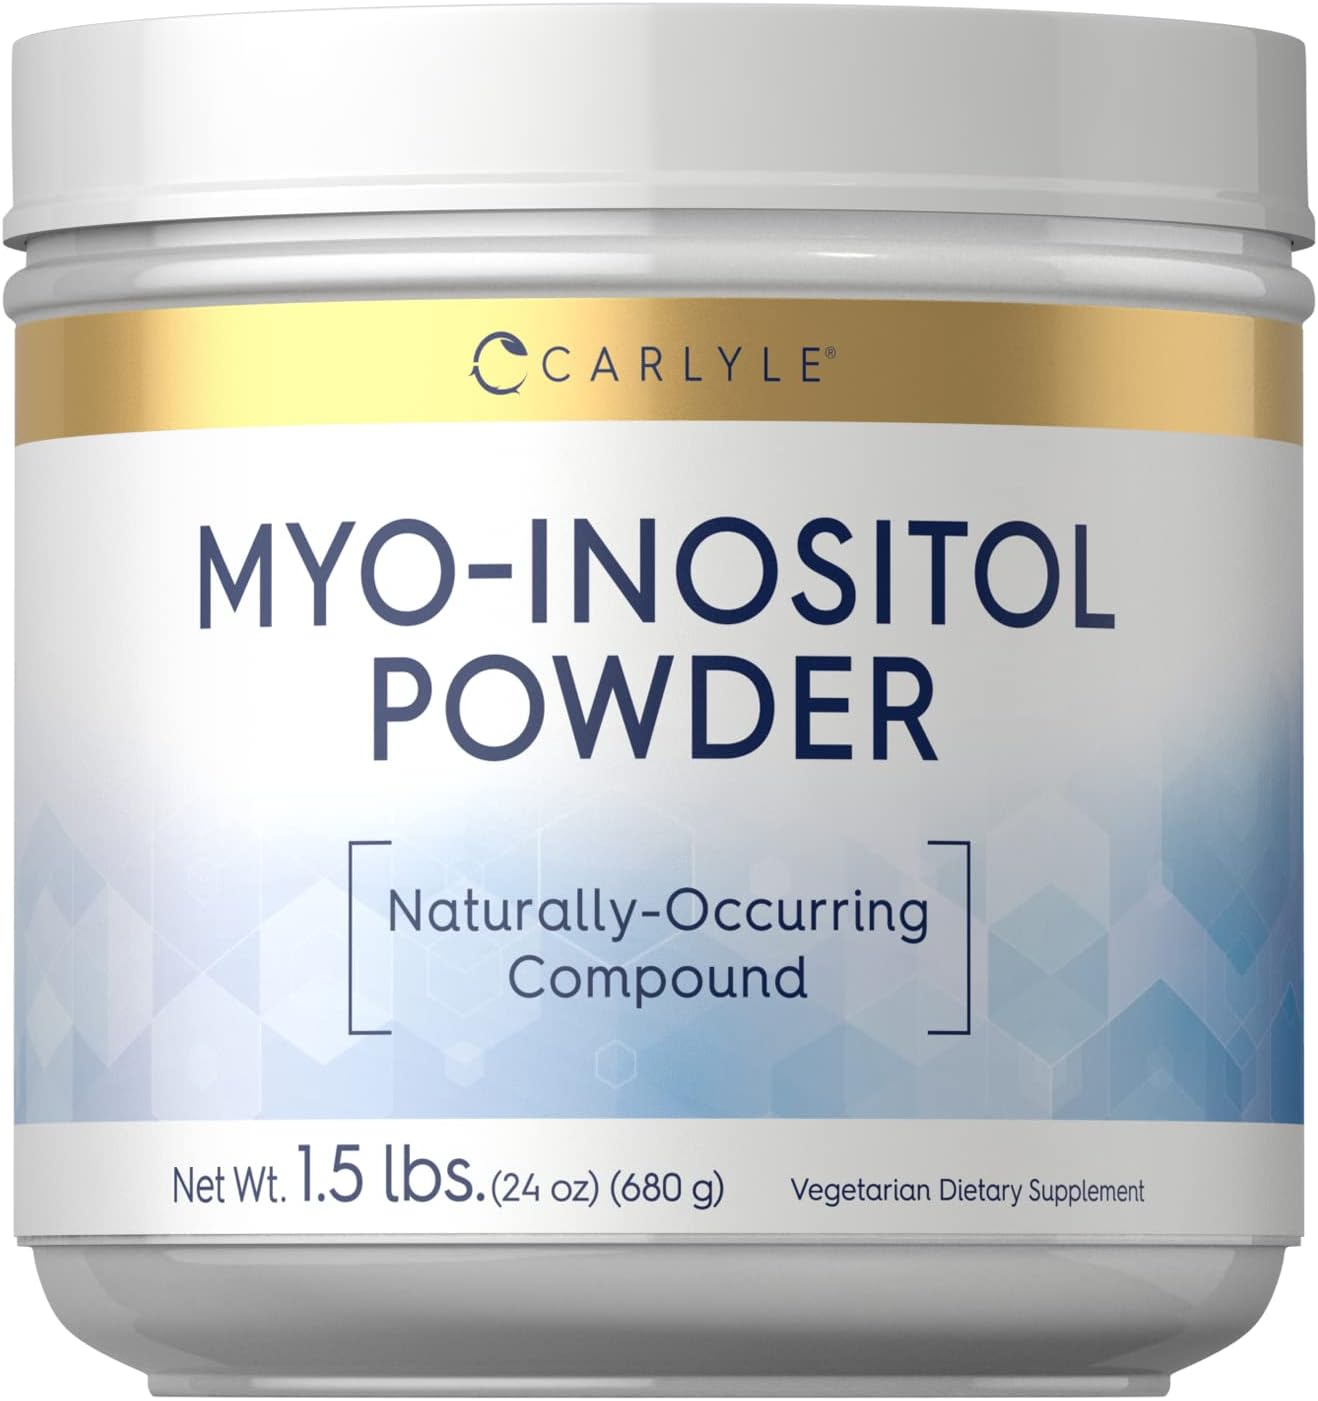 Carlyle Myo-Inositol Powder Supplement | 1.5 lbs | Naturally Occuring Compound | Vegetarian, Non-GMO, Gluten Free